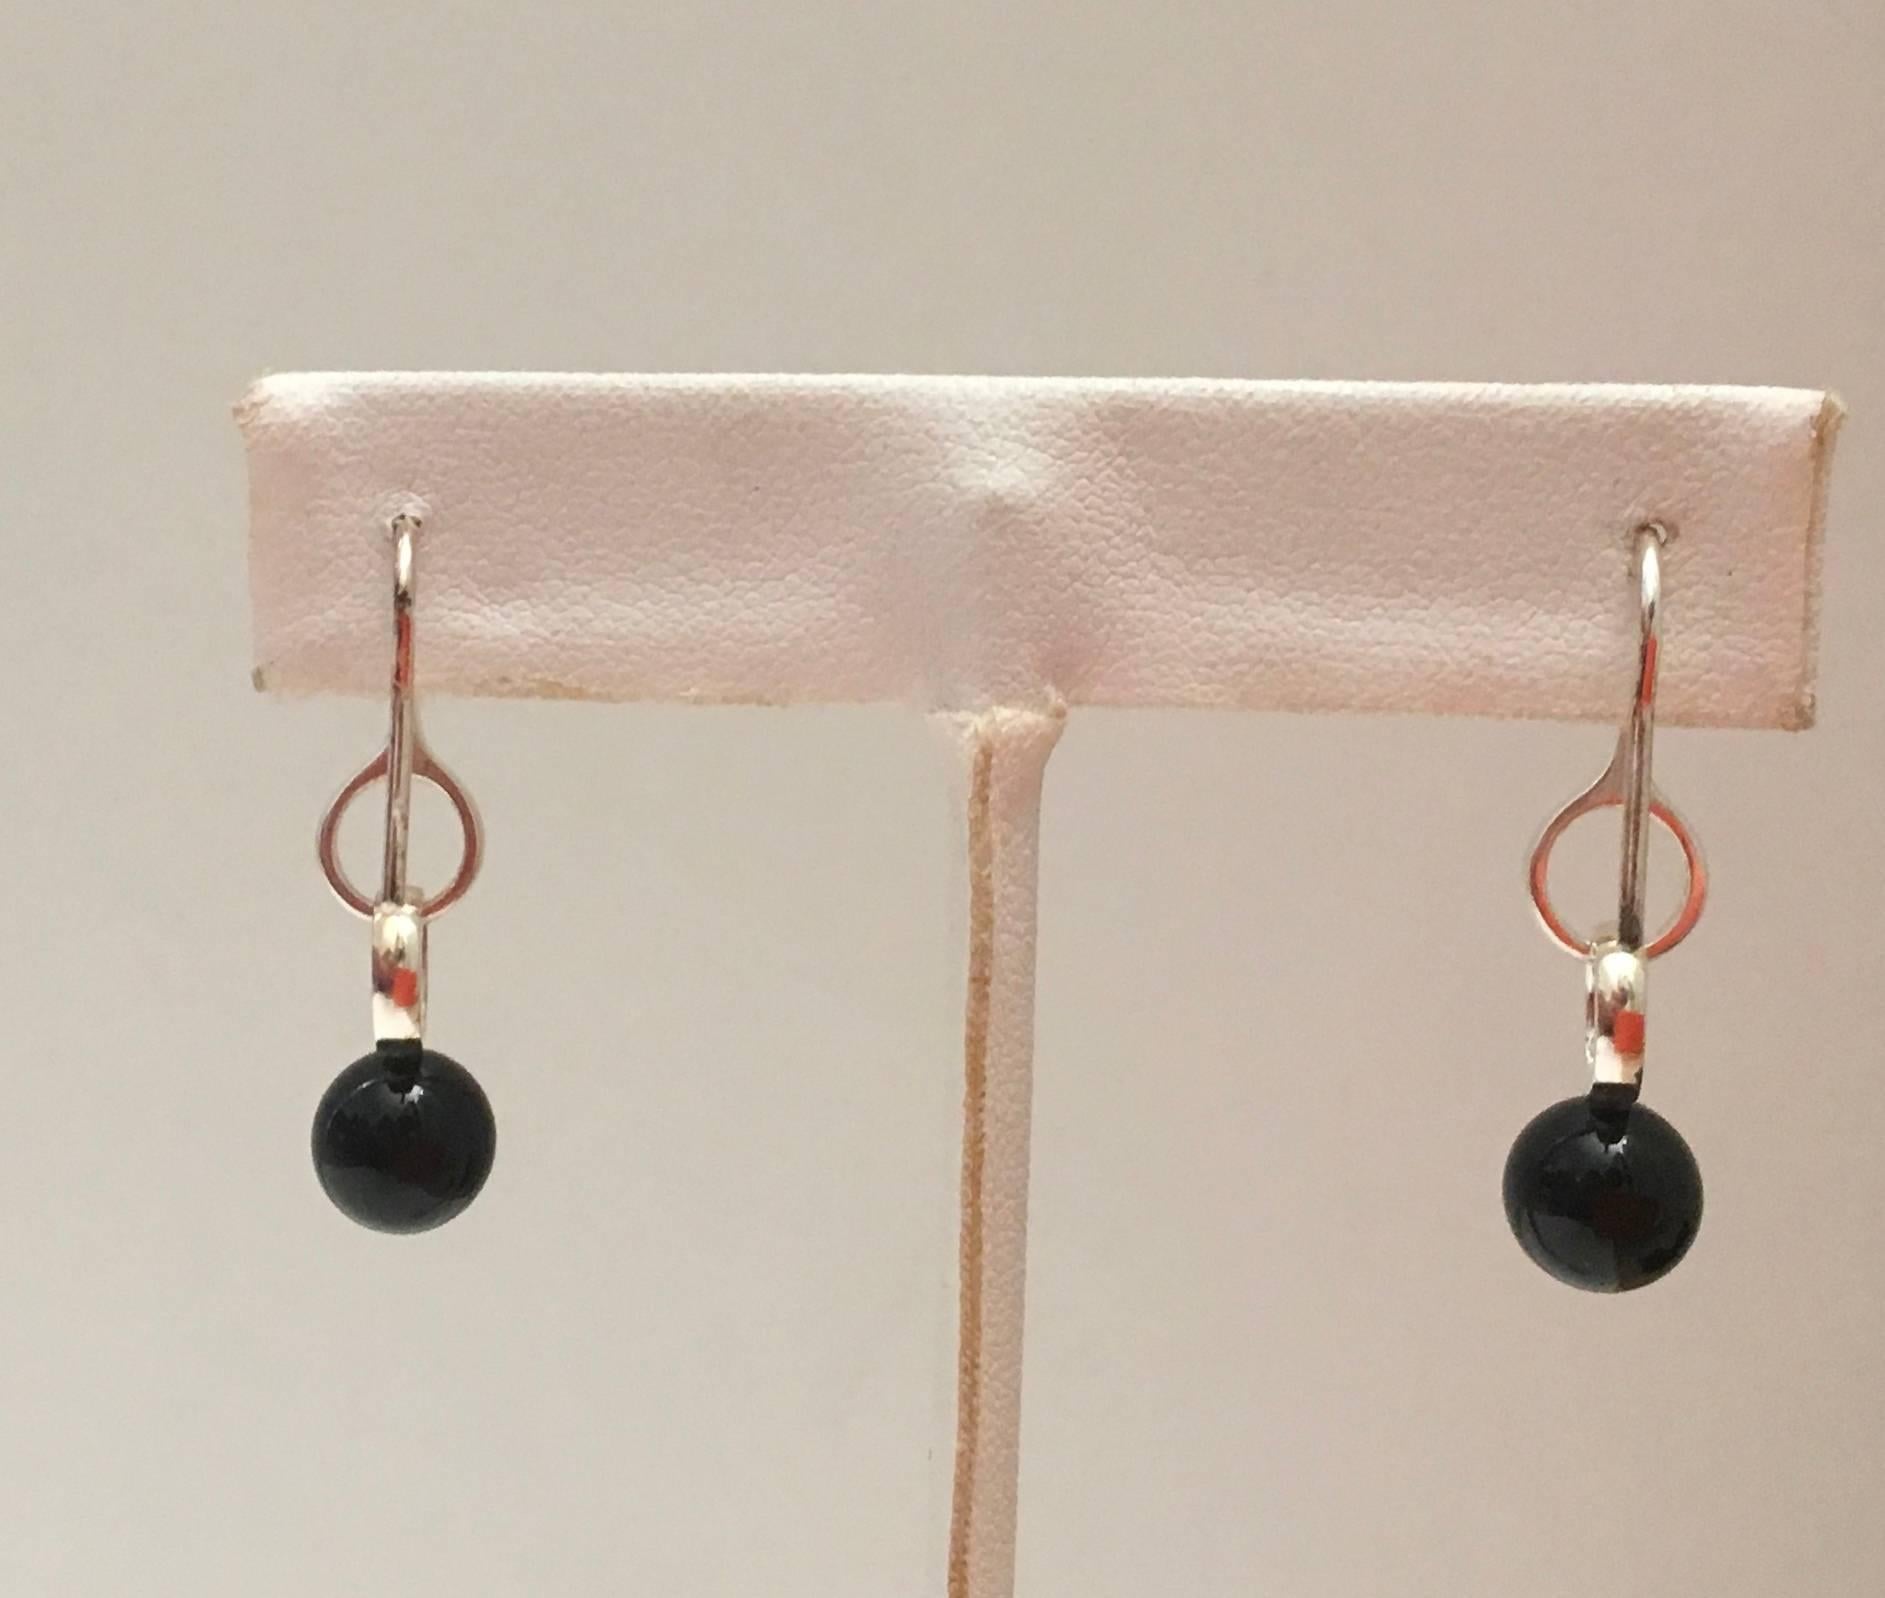 Presented here is a new beautiful pair of earrings from Georg Jensen. This lovely pair of earrings is designed for pierced ears and has a black onyx stone suspended from two rings of silver. The earrings are signed by Georg Jensen with an engraving.